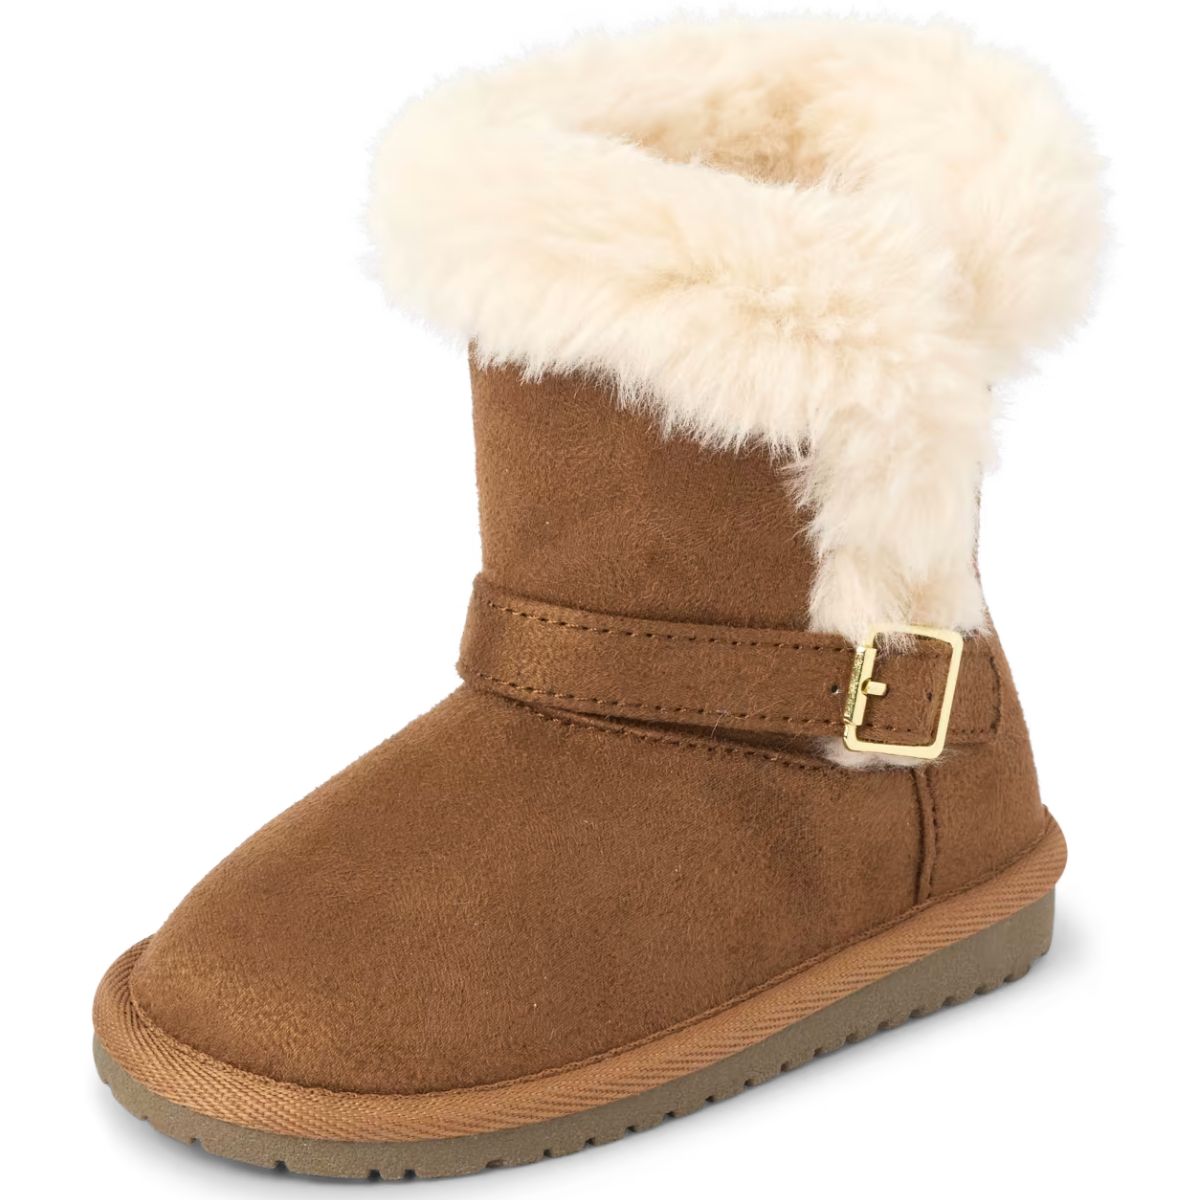 The Children's Place Girl's Warm Lightweight Winter Boot with faux fur trim and a cute gold buckle at ankle